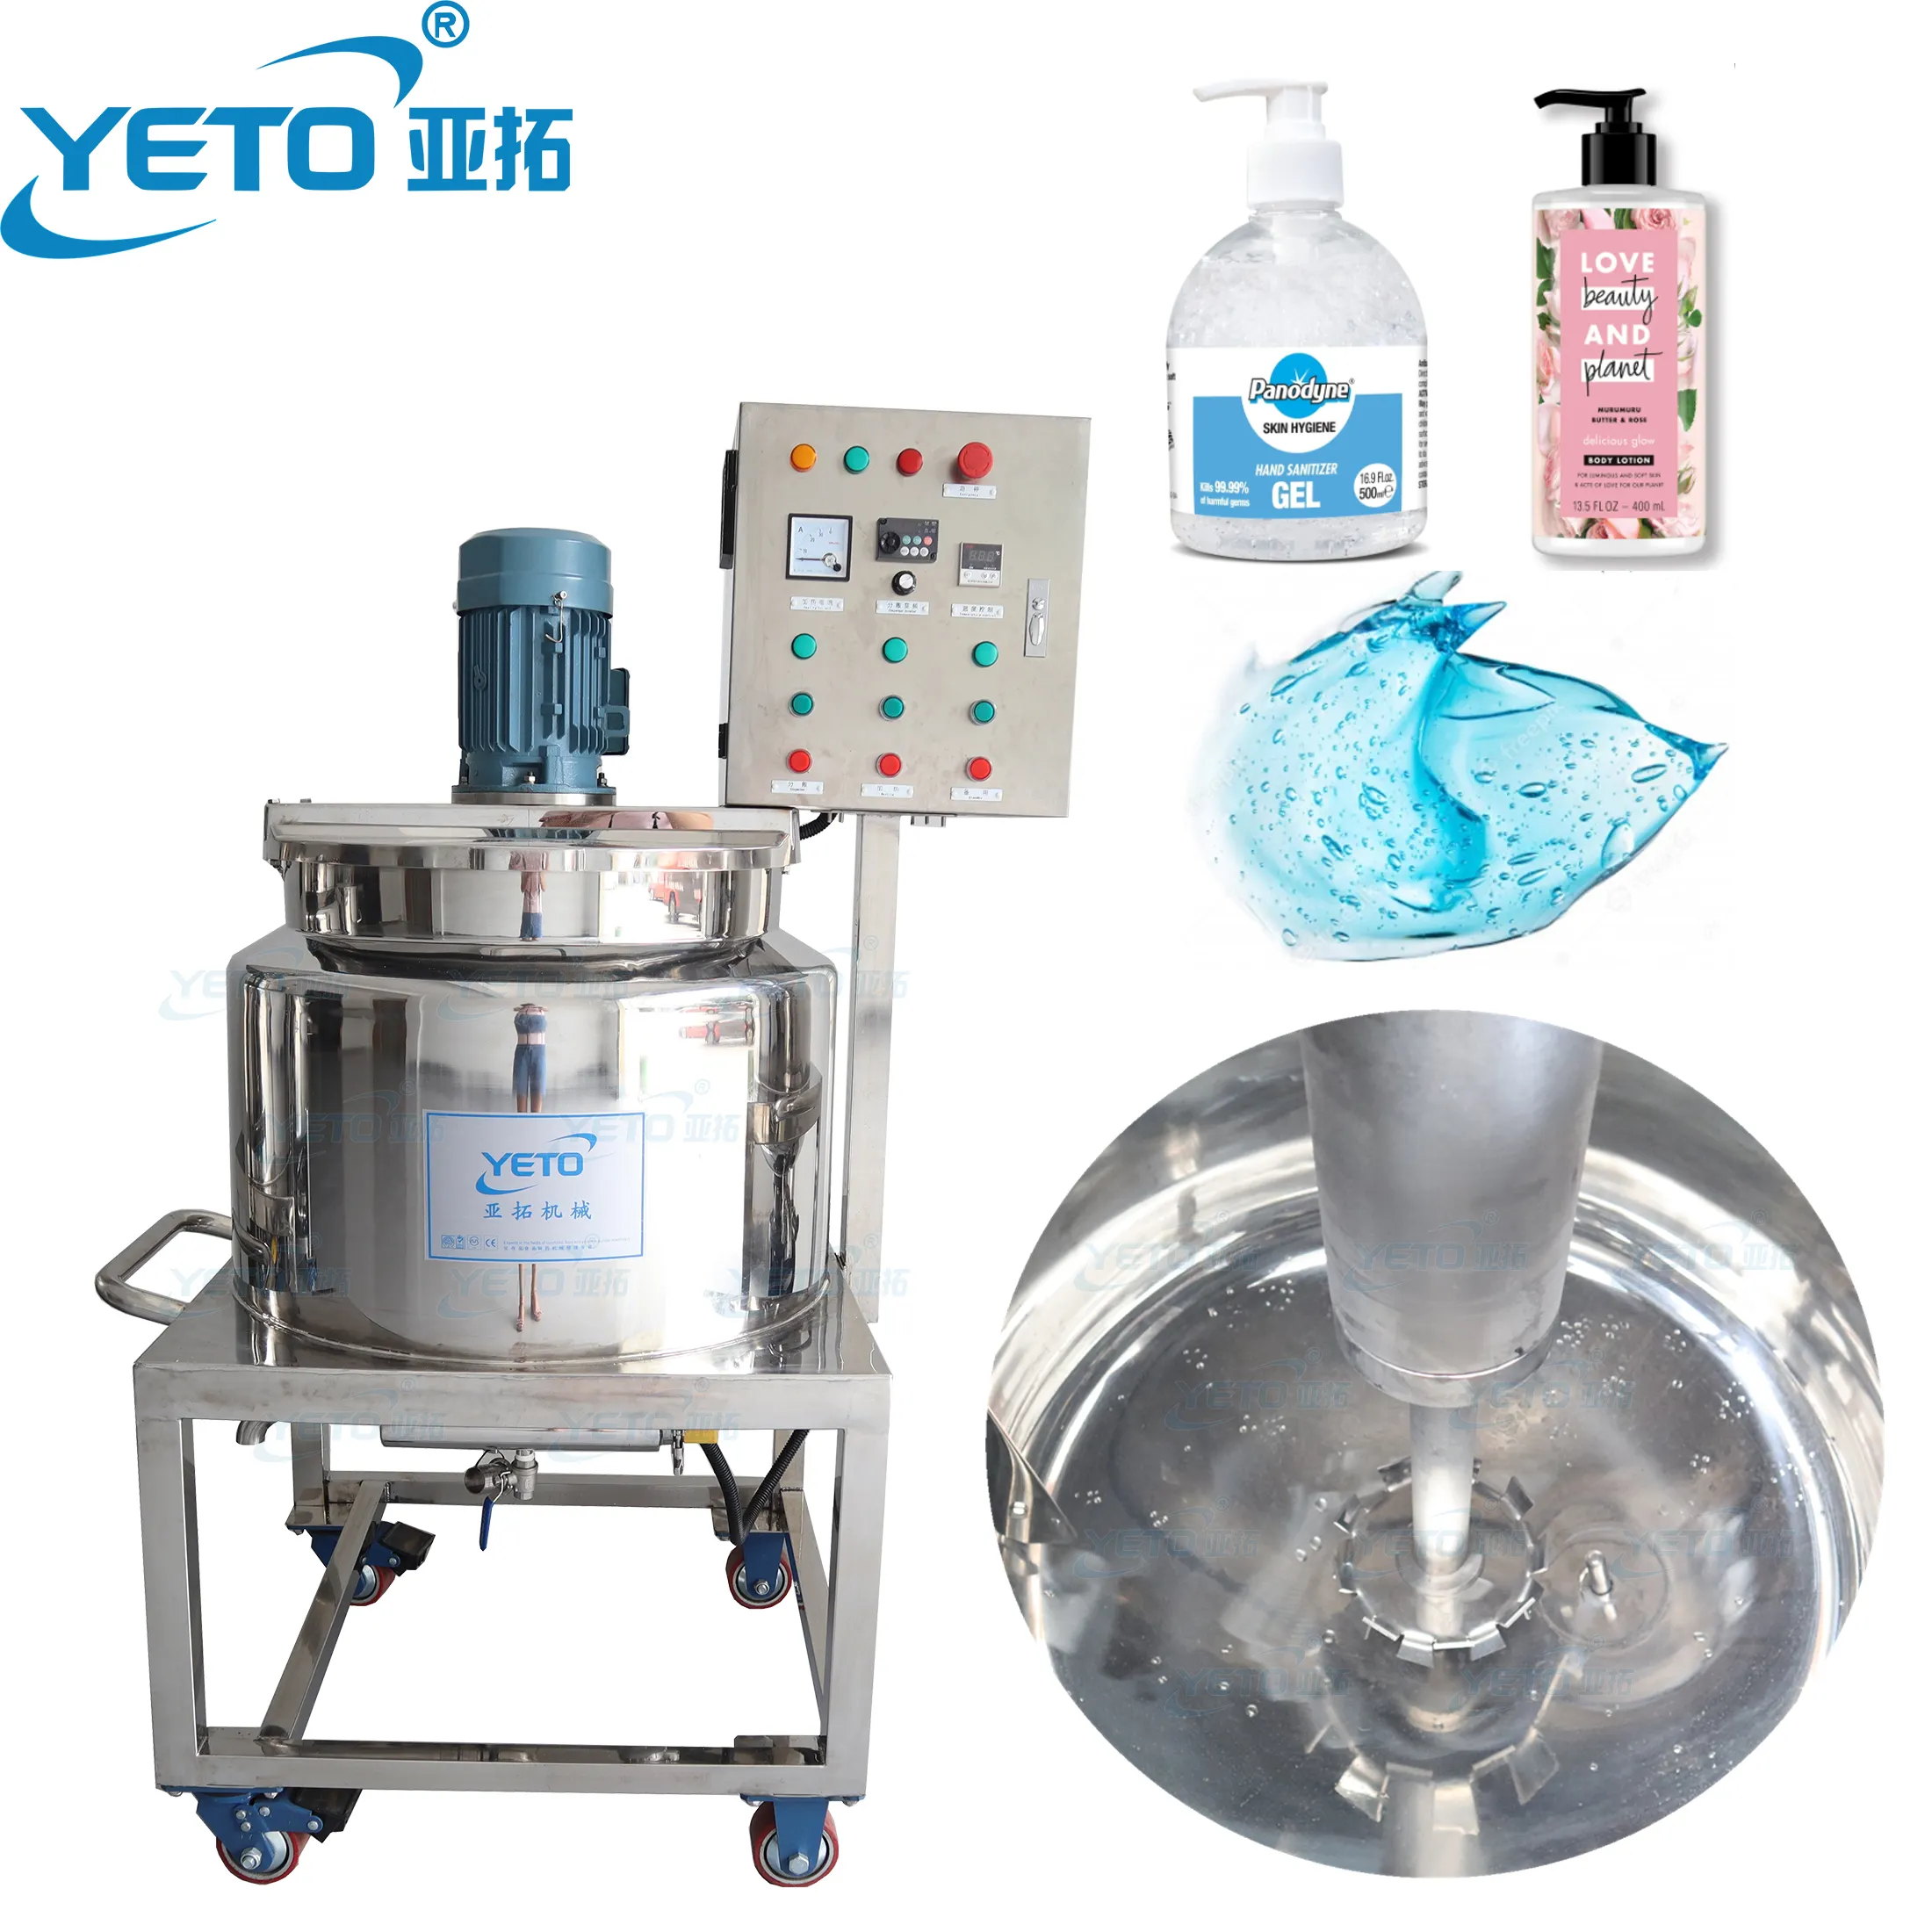 YETO-50L 100L Mixing Tank High Speed Disperser Machine Cosmetic Mixing Vessel Industrial Heating Tank With High Speed Mixer